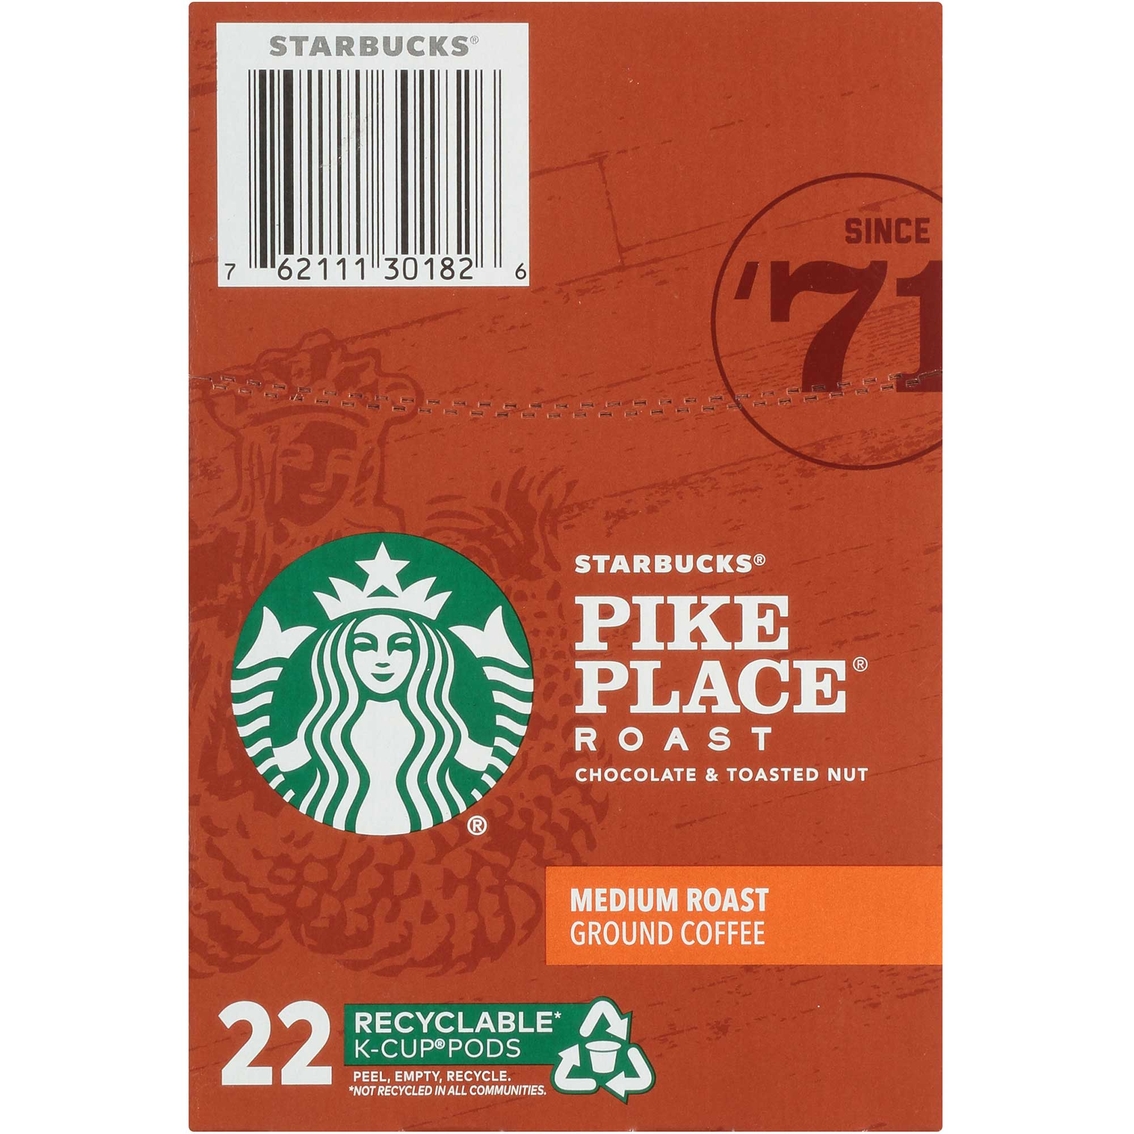 Starbucks K-Cup Pike Place Roast Coffee Pods 22 ct. - Image 3 of 6